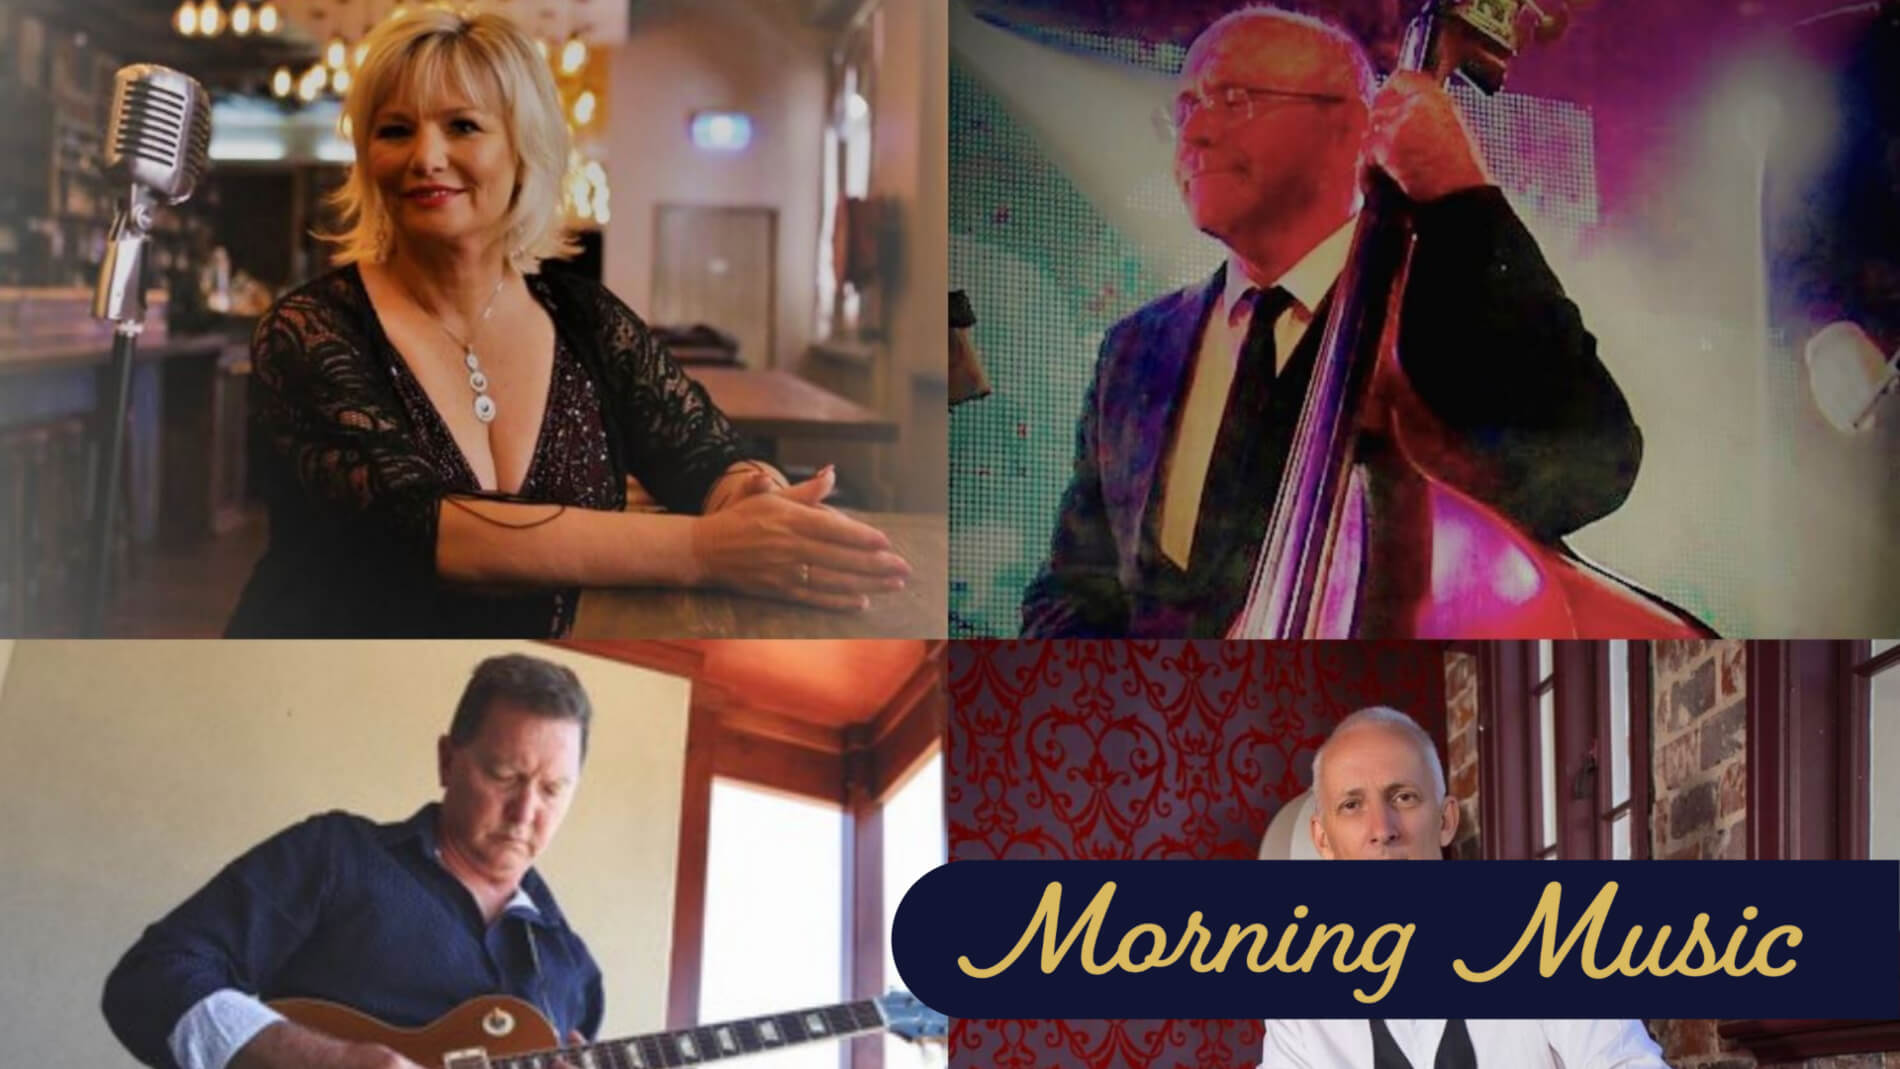 The Seekers, Featuring in our May 2022 Morning Music Program